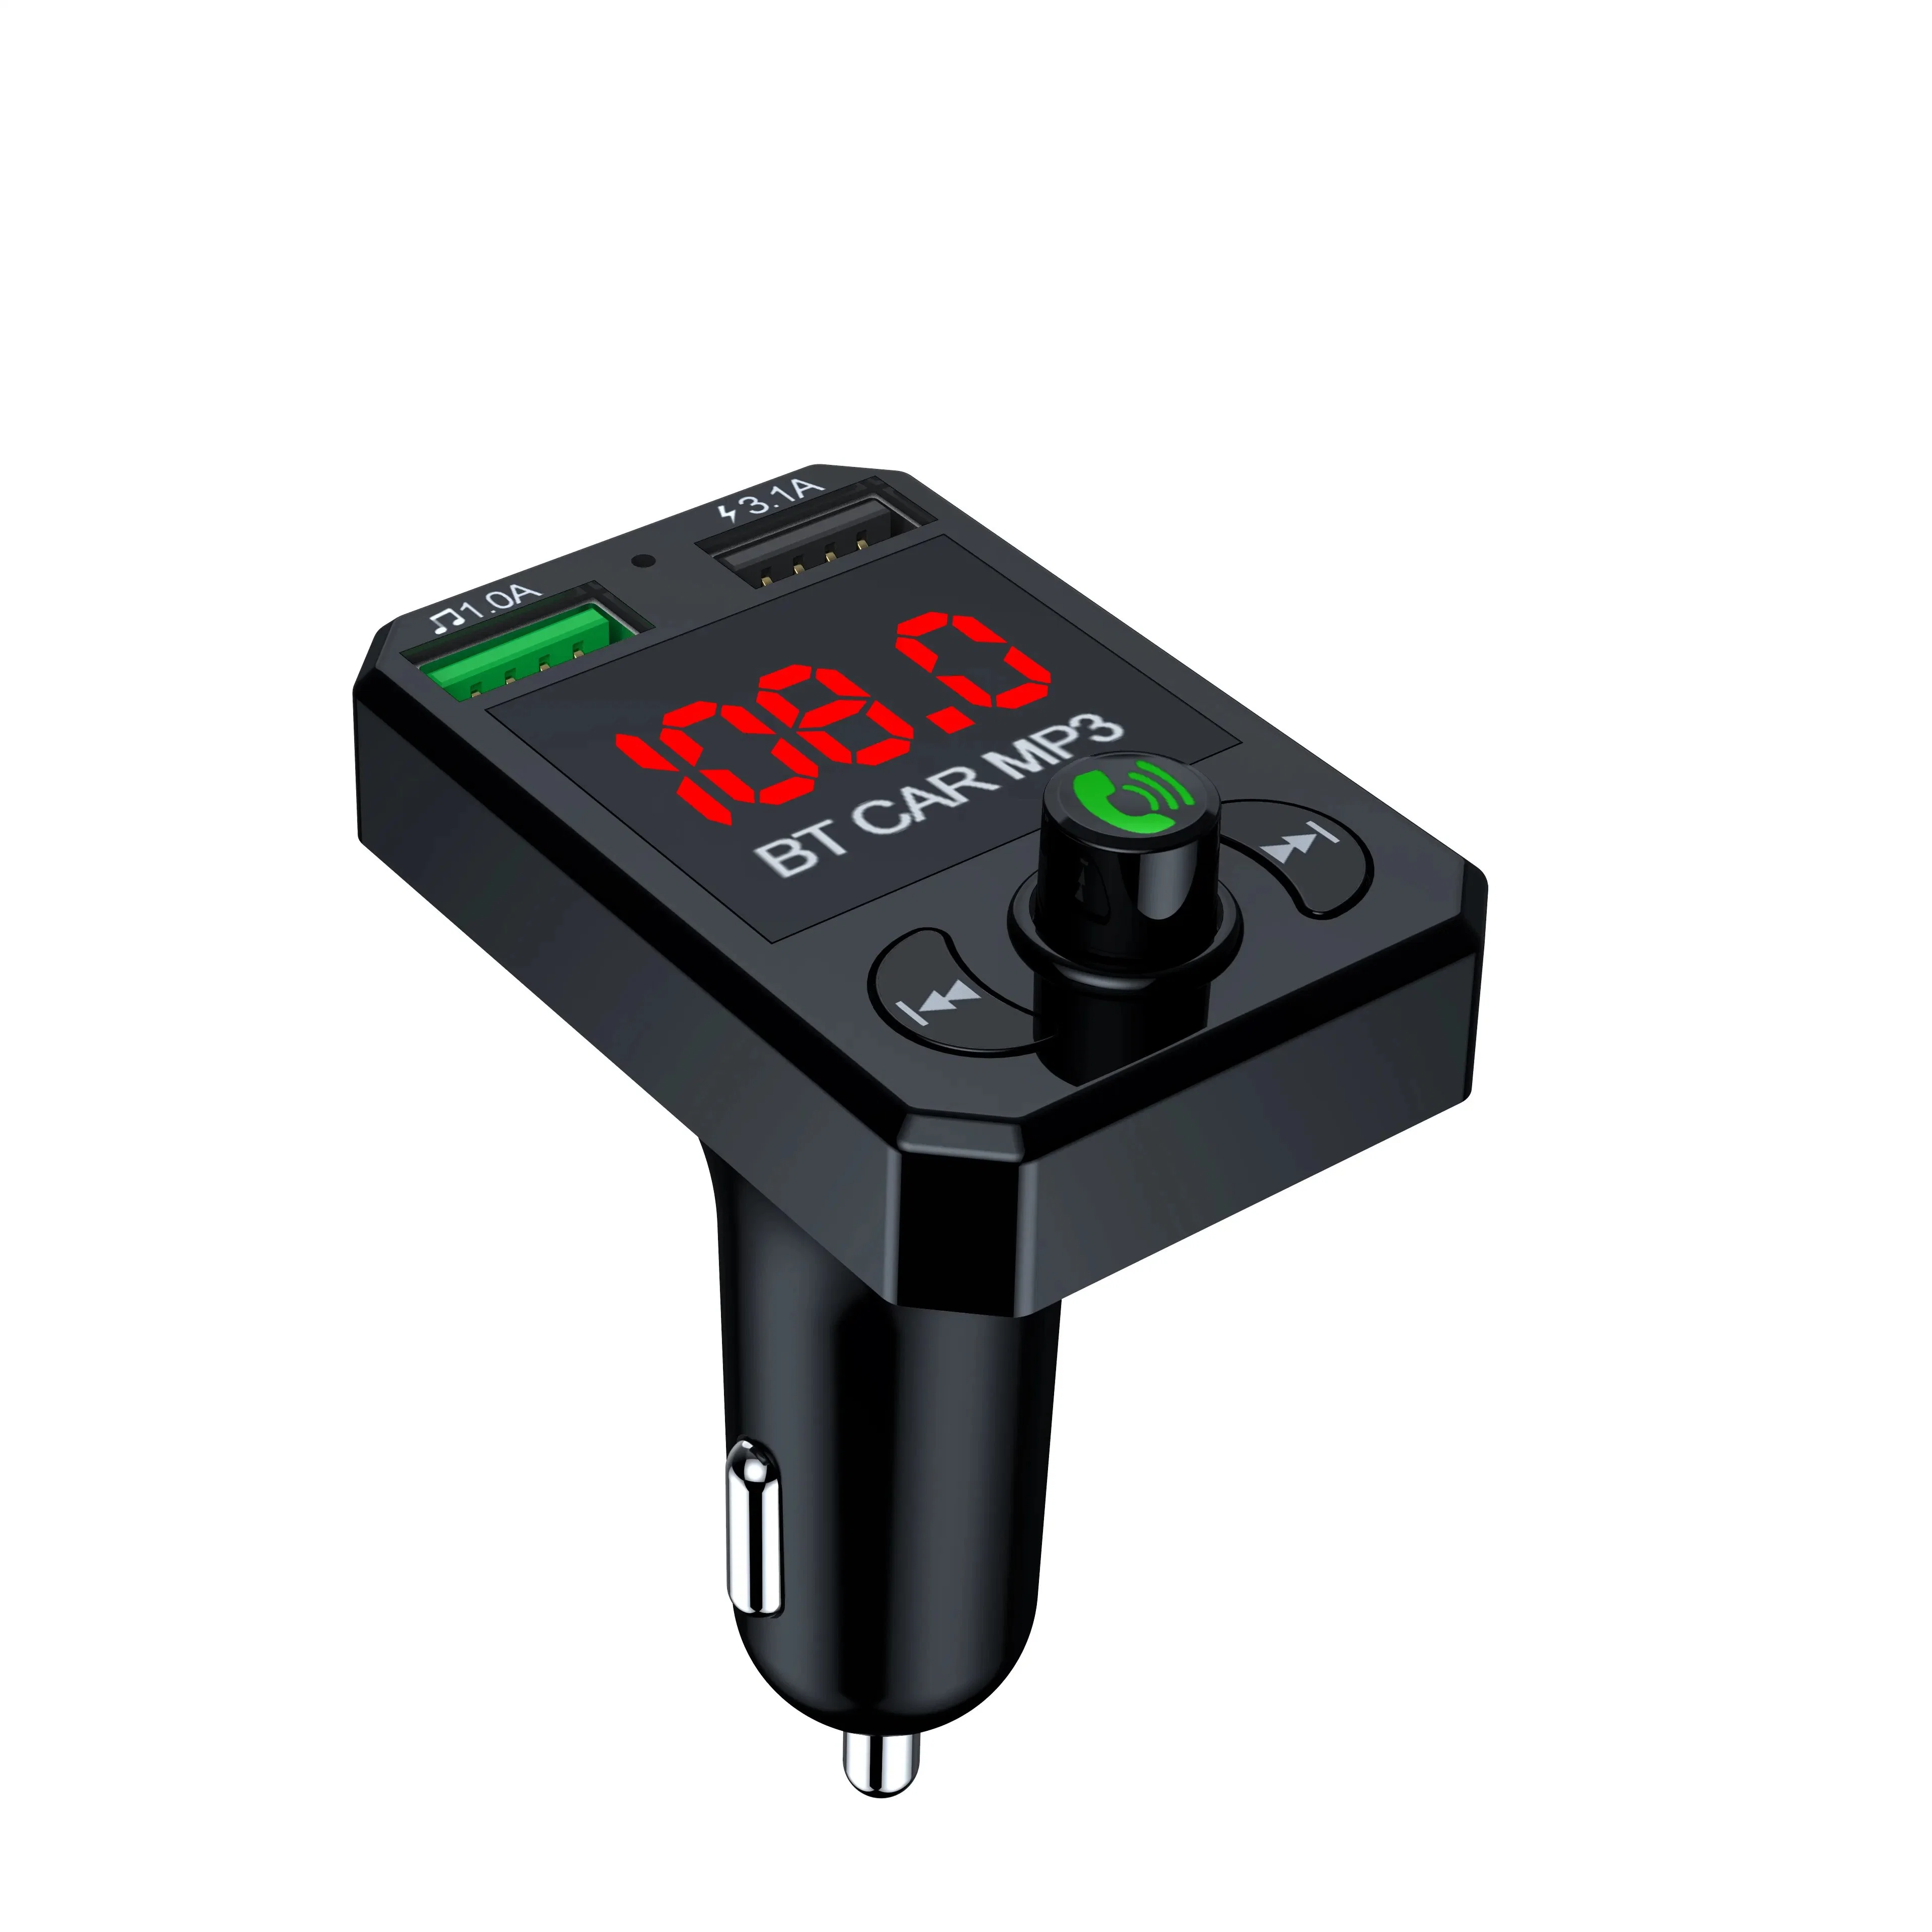 FM Transmitter Wireless Adapter Audio Receiver 3.1A Dual USB Smart Fast Charger Car Accessories Car Bluetooth-5.0 MP3 Player